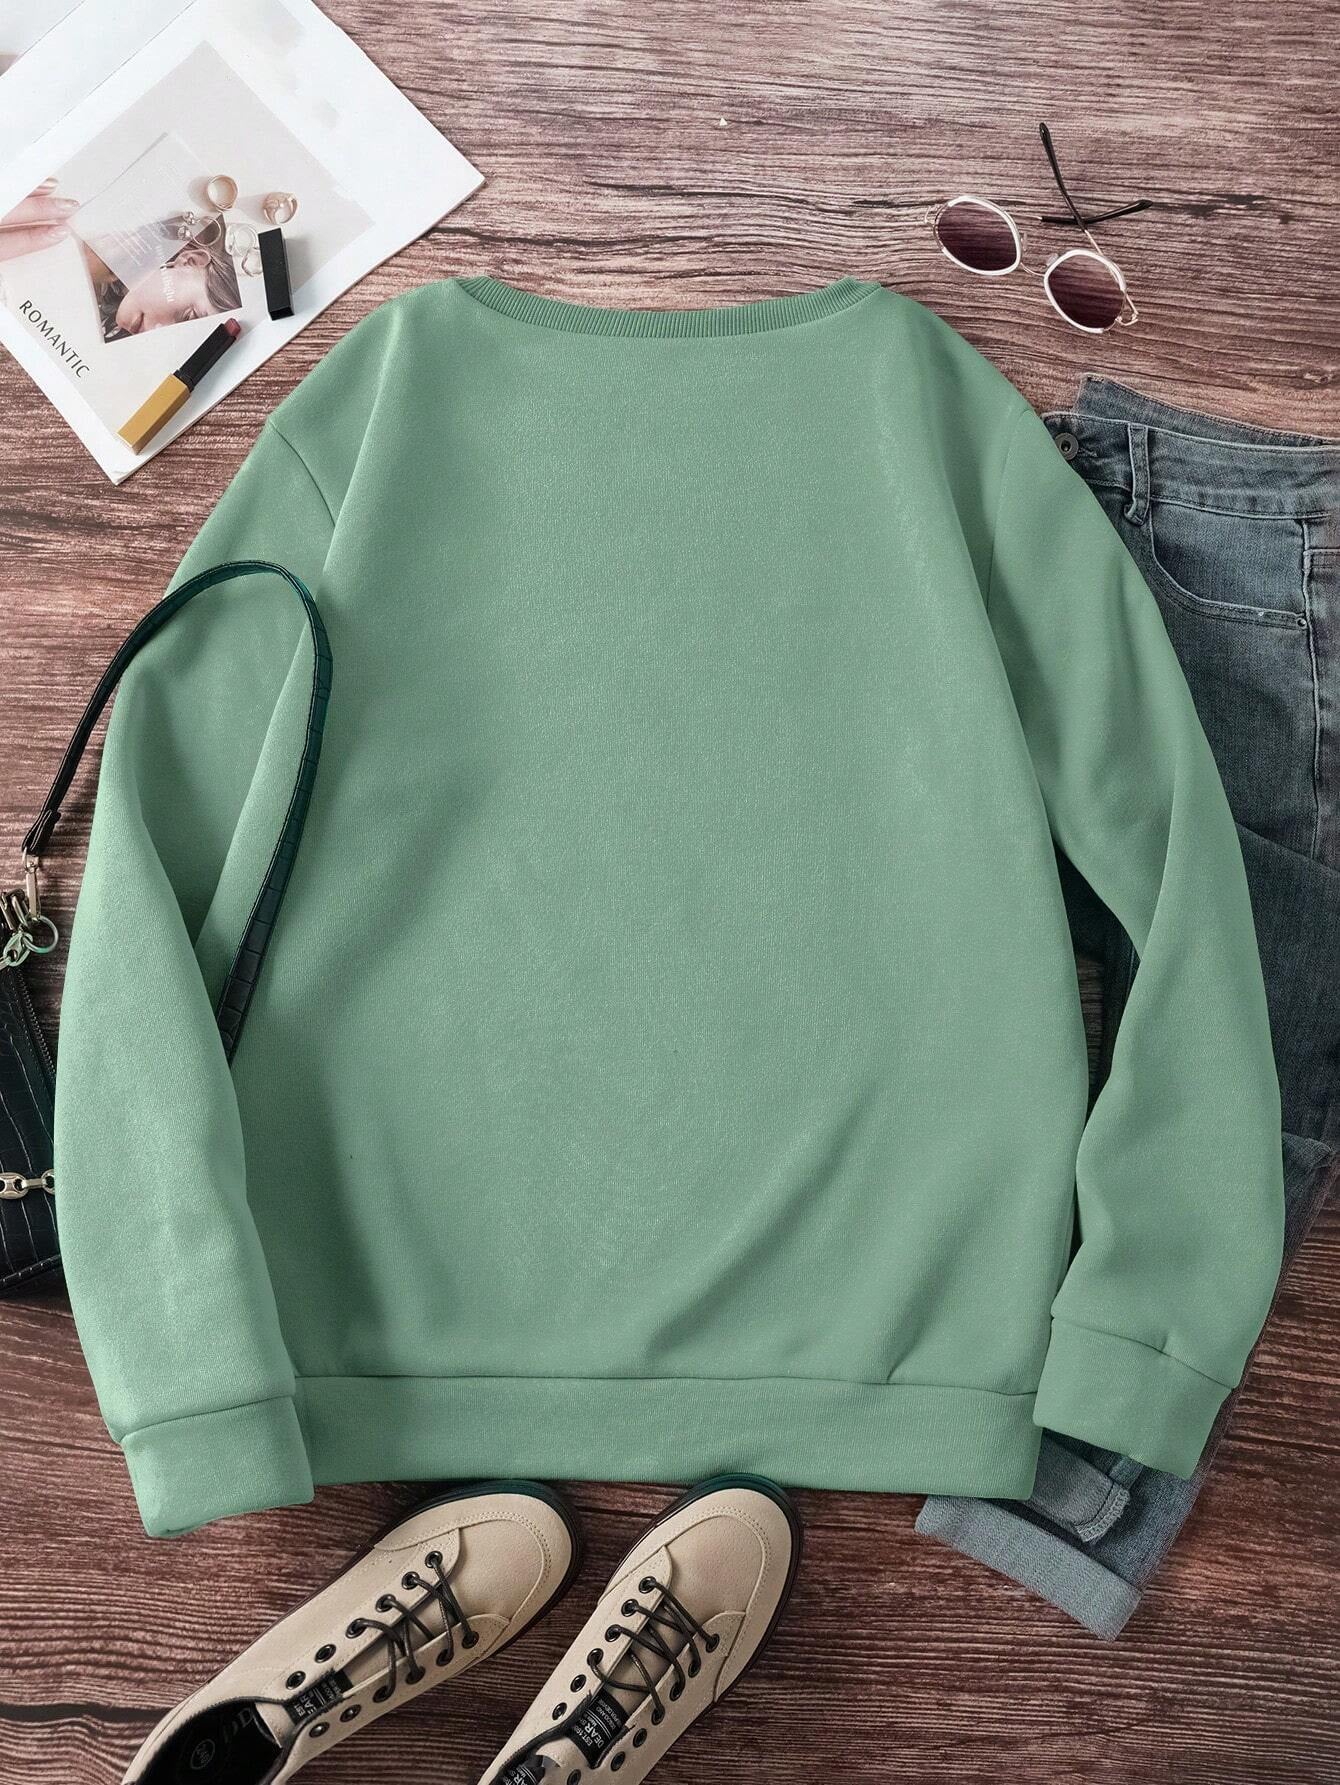 Clover Graphic Round Neck Long Sleeve Sweatshirt, Suitable for Leisure and St. Patrick's Day.